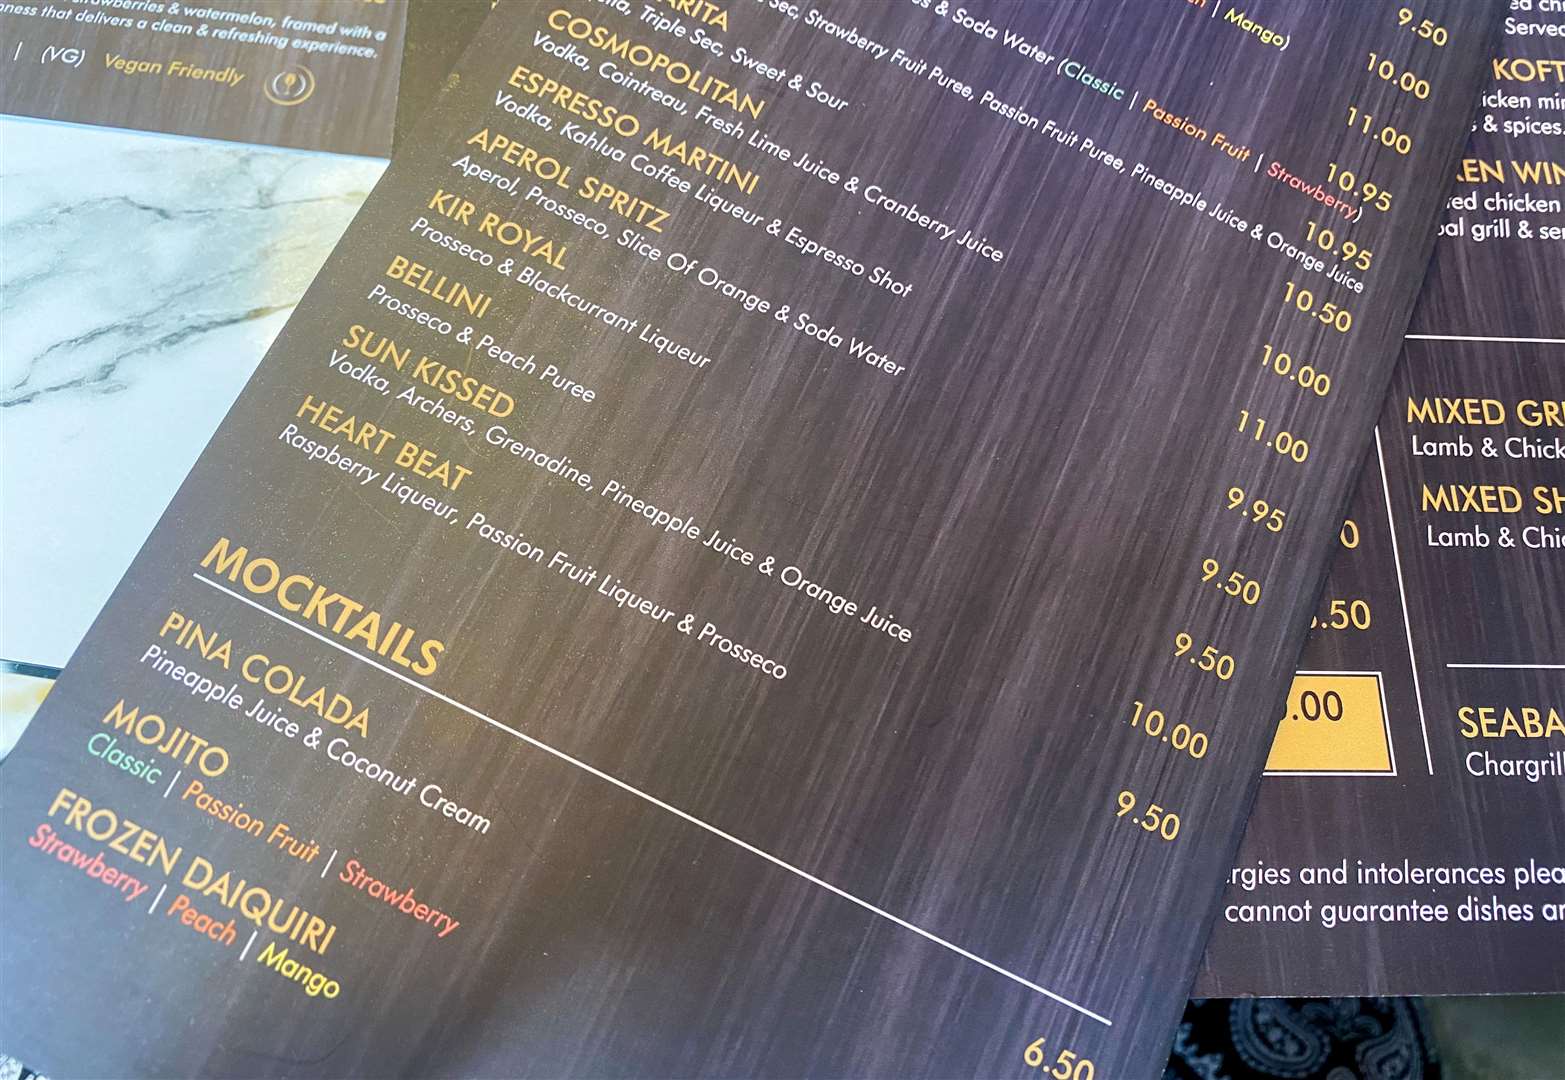 The cocktail menu had lots of options